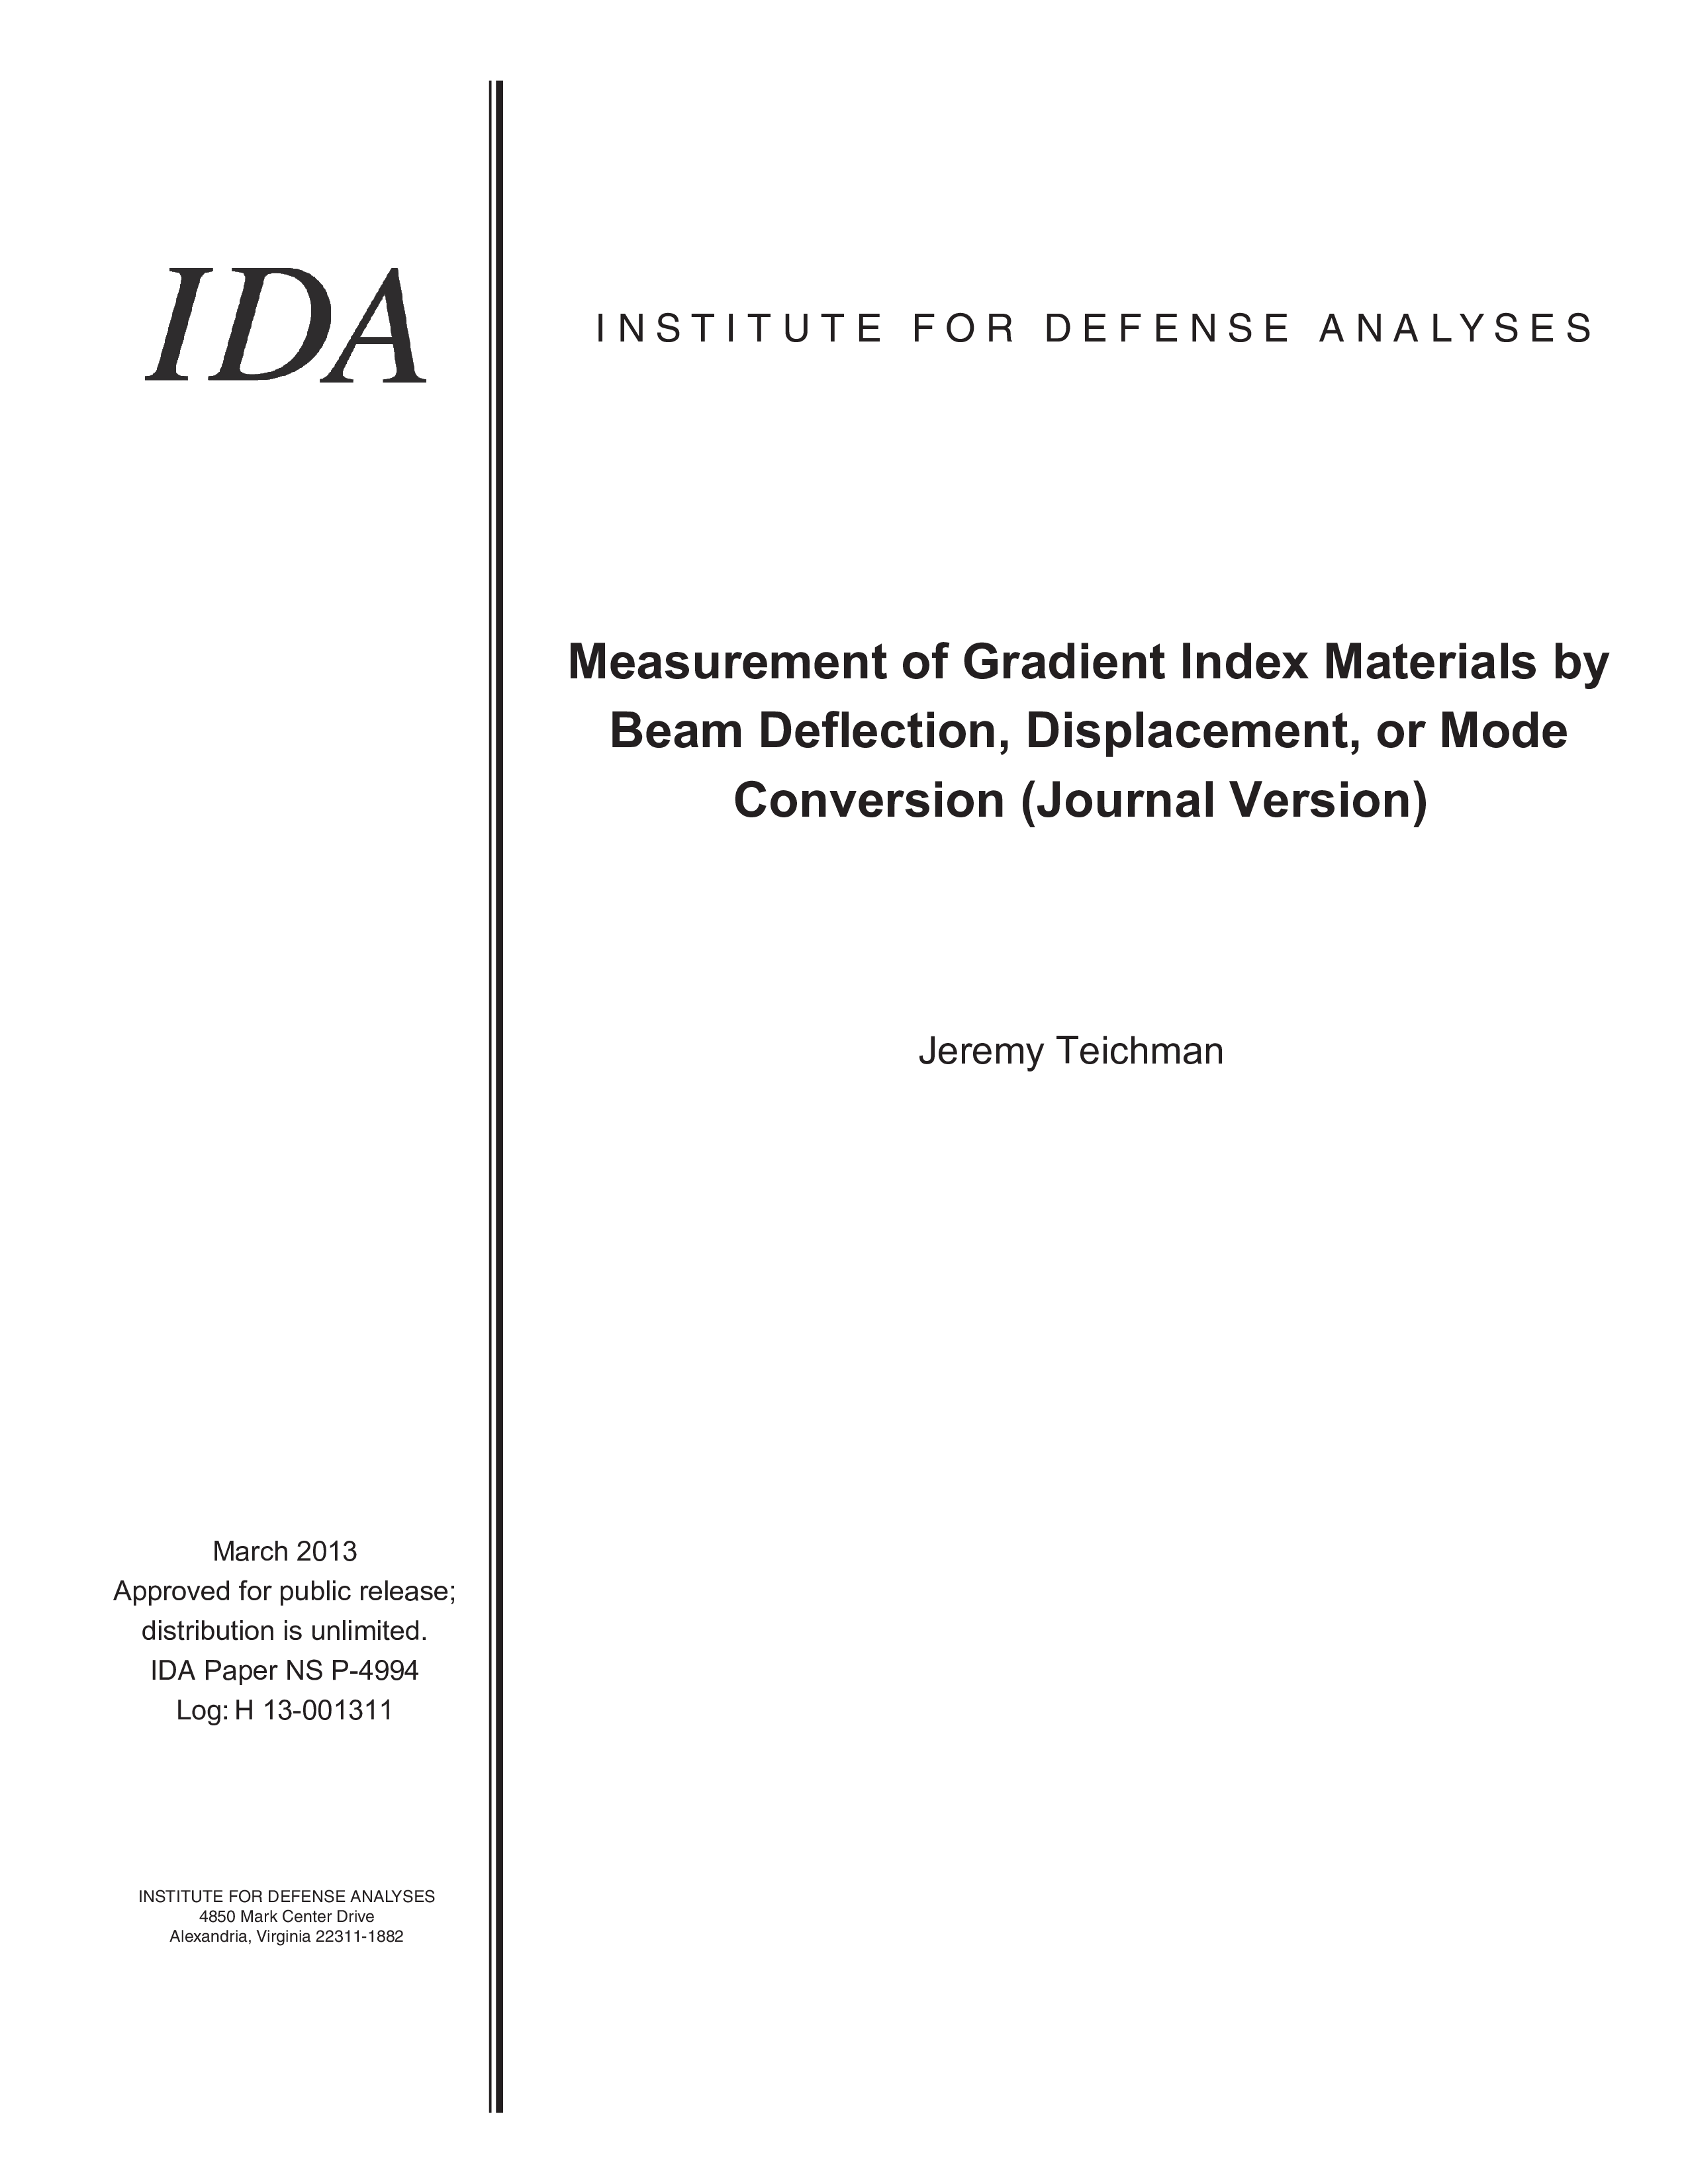 Measurement of Gradient Index Materials by Beam Deflection, Displacement, or Mode Conversion (Journal Version)